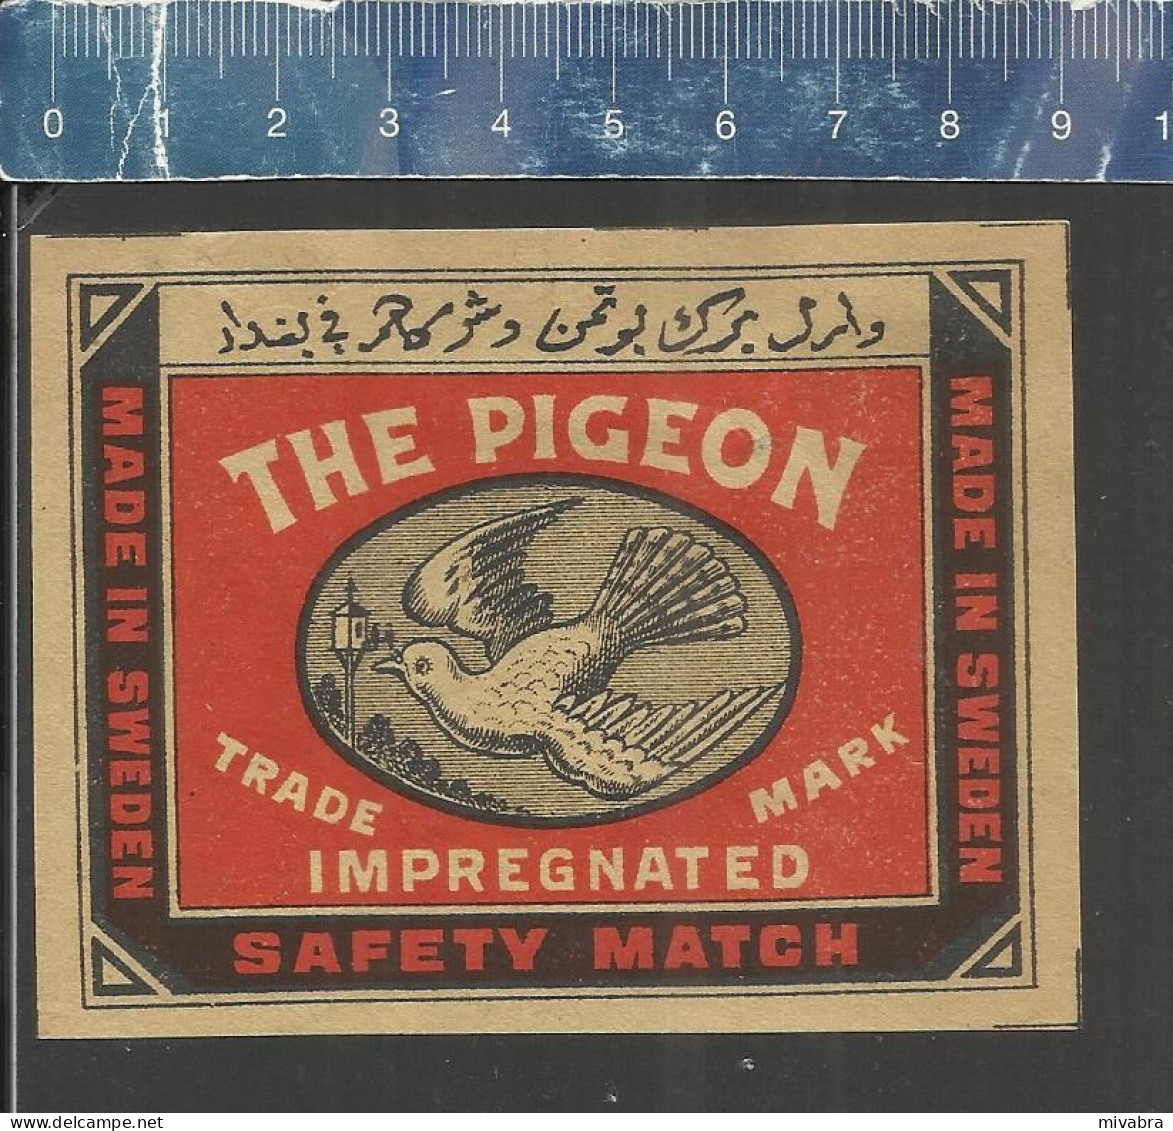 THE PIGEON  IMPREGNATED  SAFETY MATCH (PIGEONS - TAUBEN - DUIVEN PALOMA ) OLD  EXPORT MATCHBOX LABEL MADE IN SWEDEN - Zündholzschachteletiketten